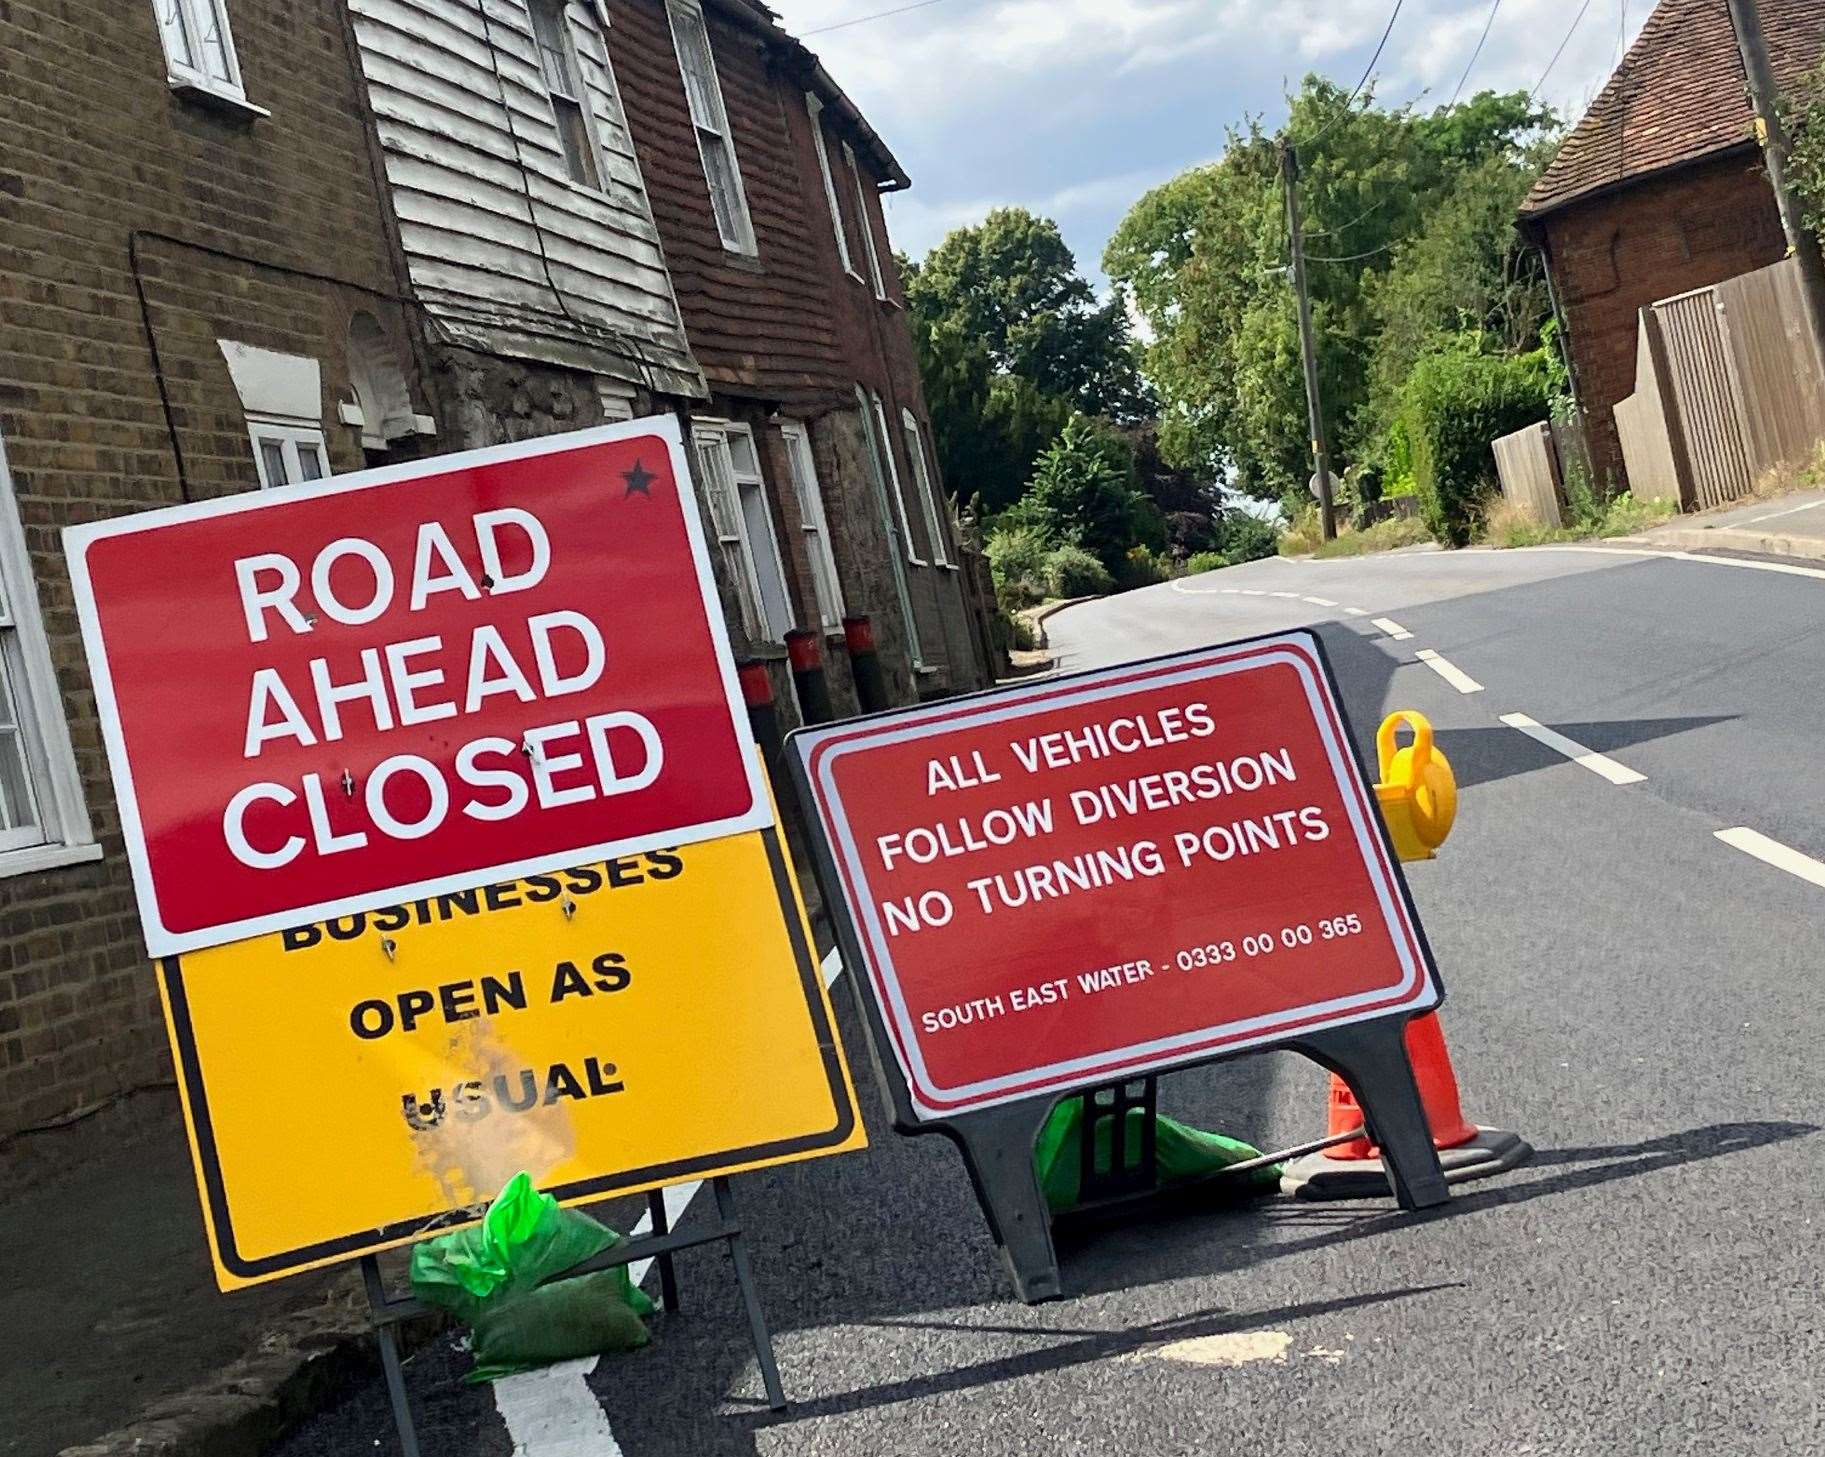 The South East Water closure of Upper Street in Leeds, near Maidstone